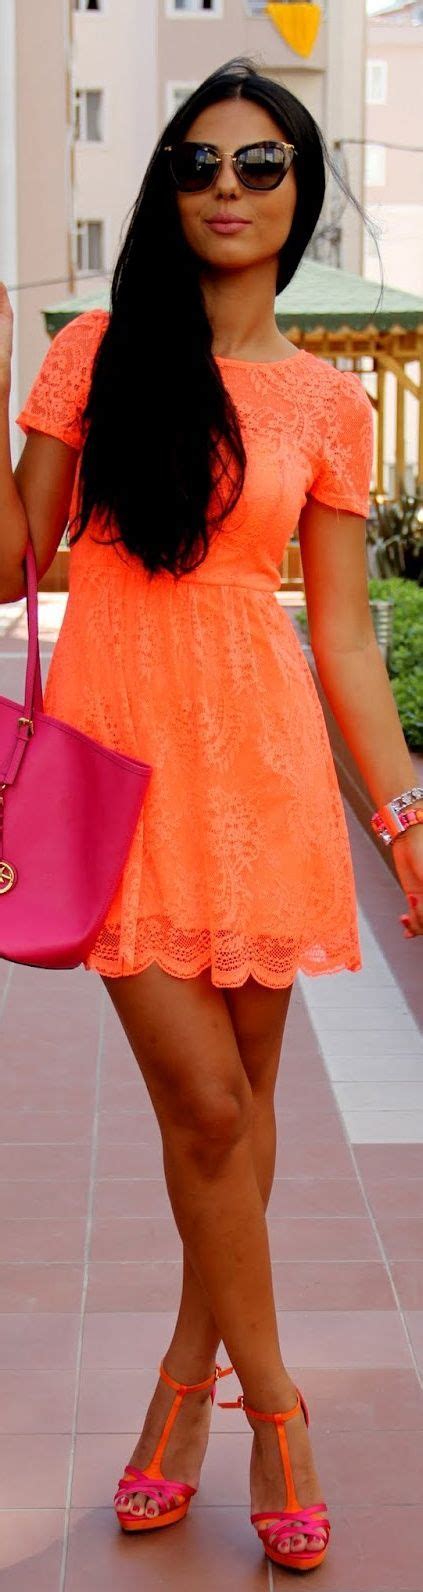 Bright Orange And Pink Summer Combination Love The Lace Dress And Sandals Creative Designs